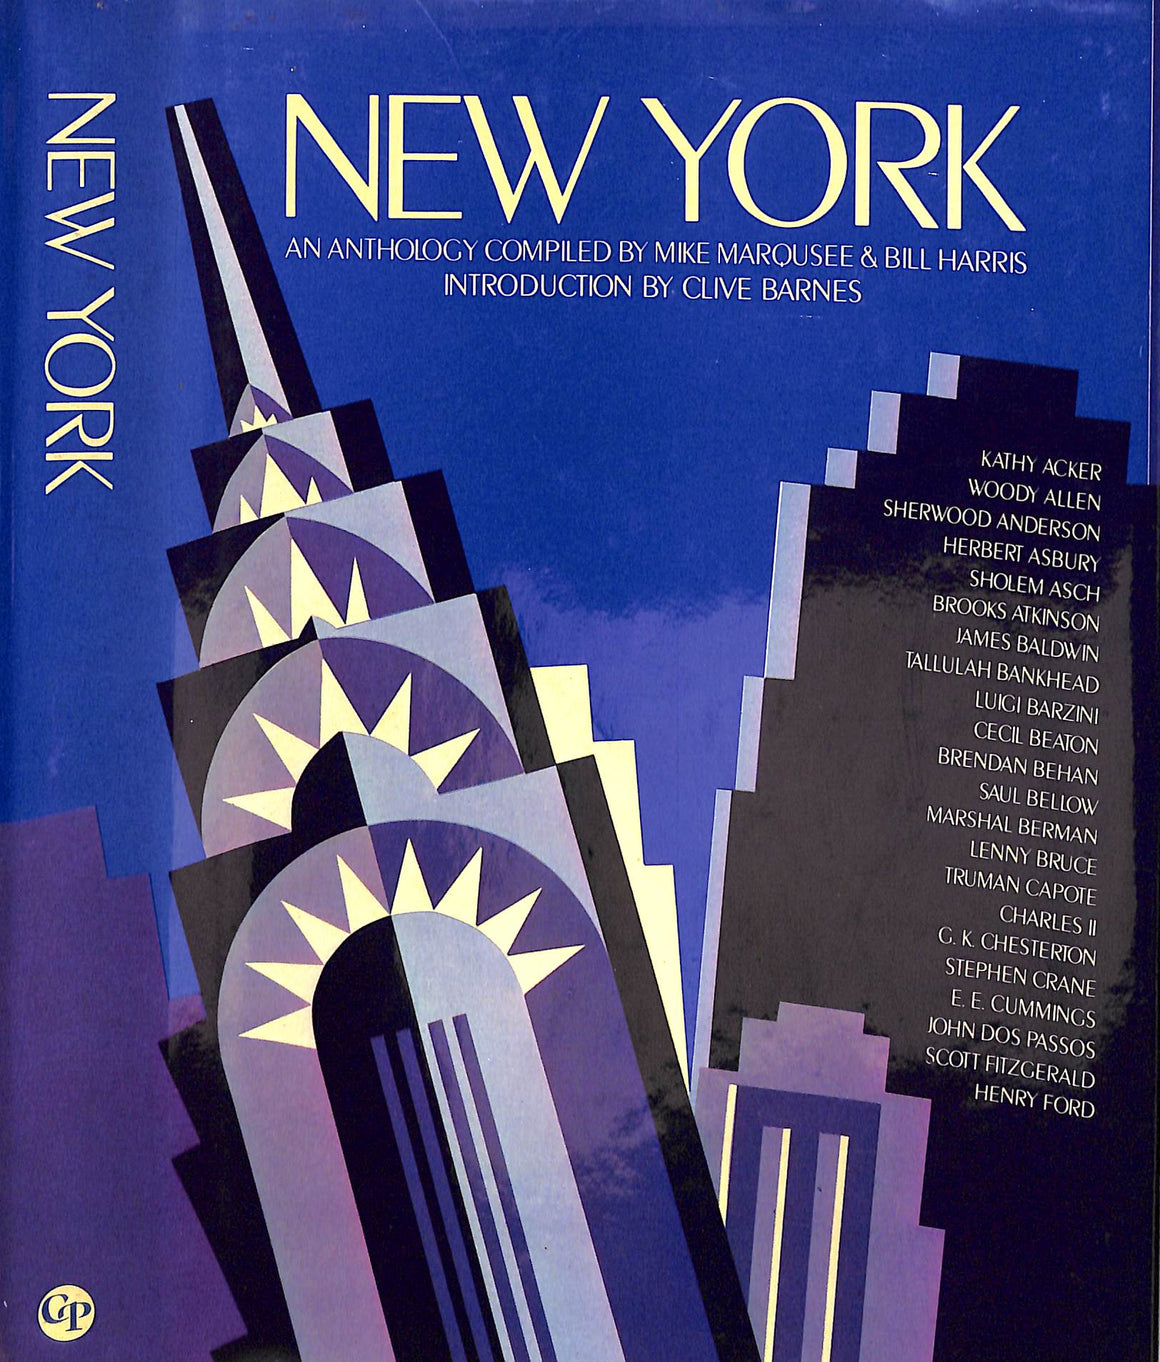 "New York An Anthology" 1985 MARQUSEE, Mike & HARRIS, Bill